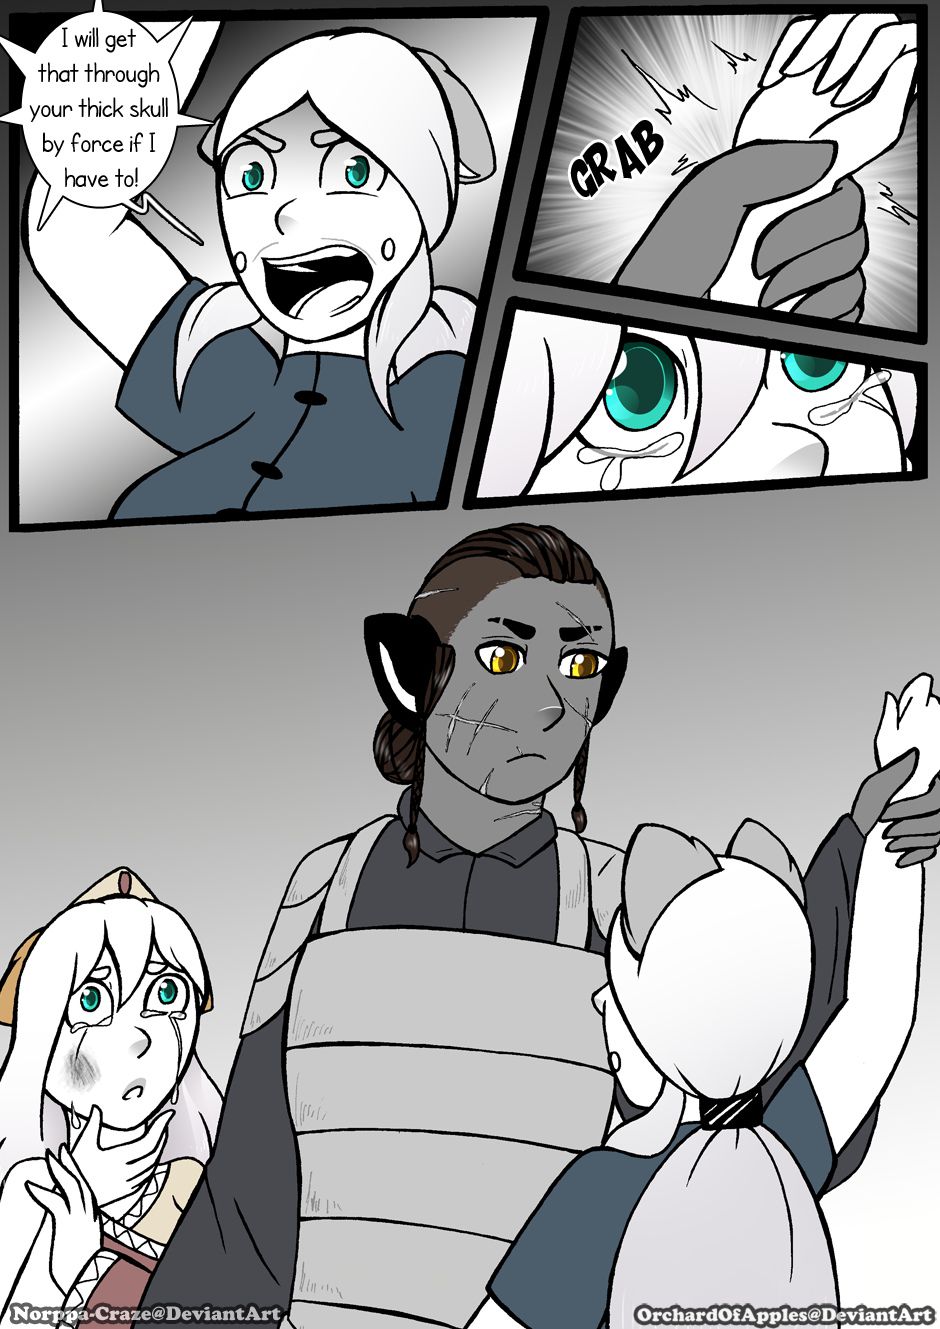 [Jeny-jen94] Between Kings and Queens [Ongoing] 280